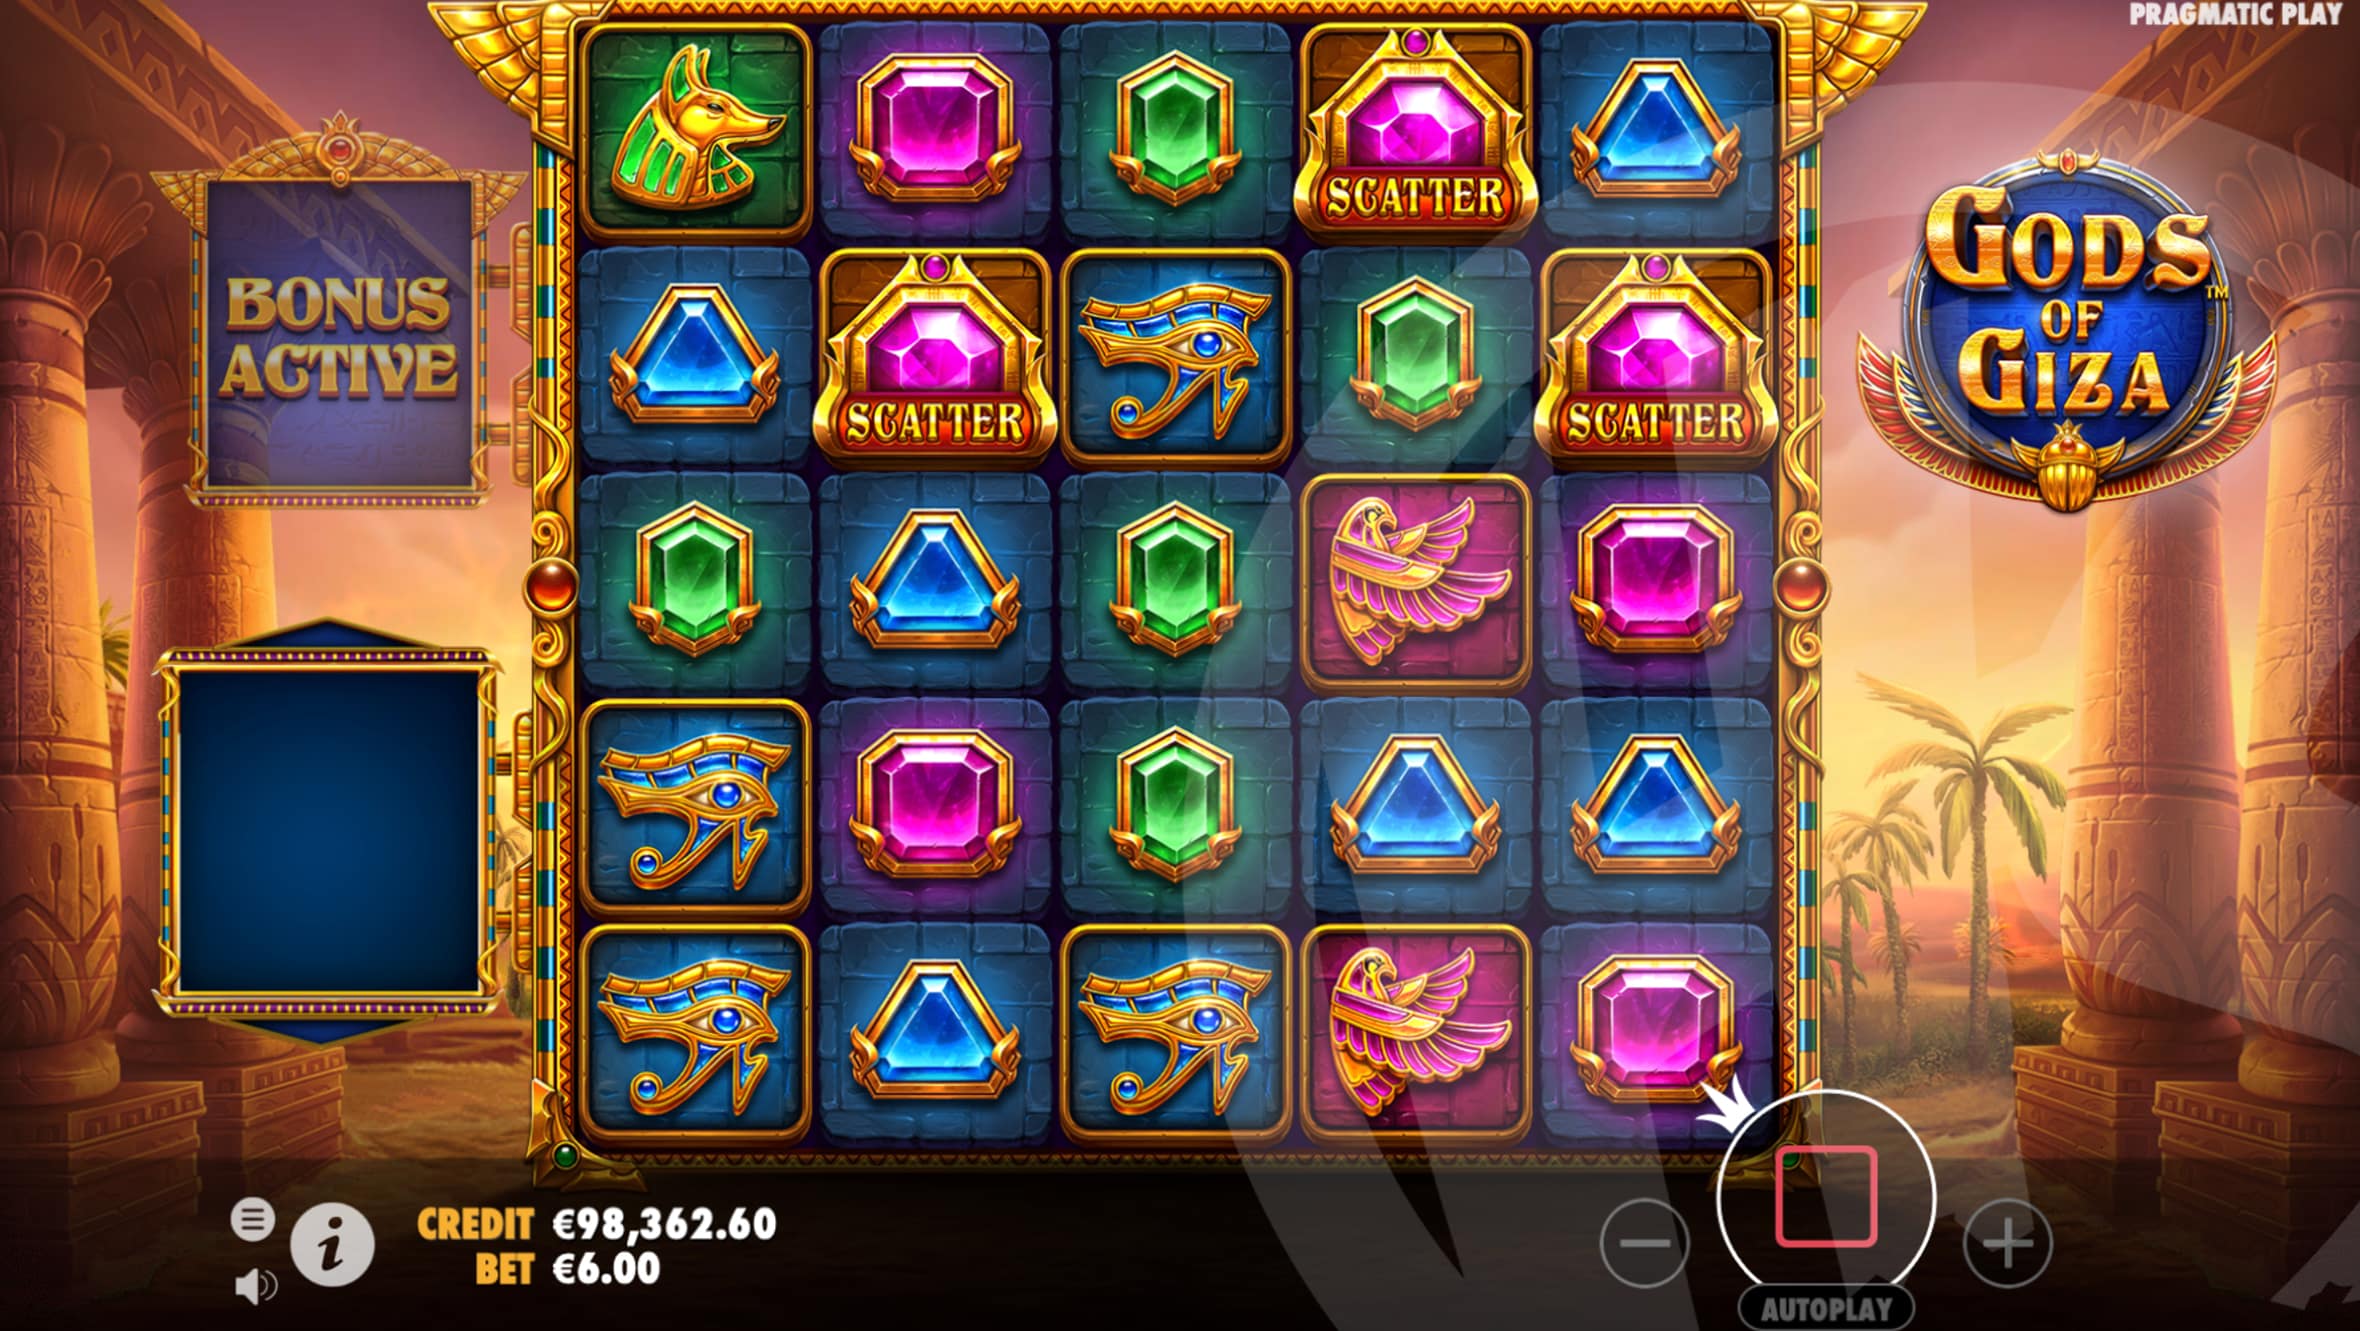 Land 3 or More Scatters to Trigger Free Spins